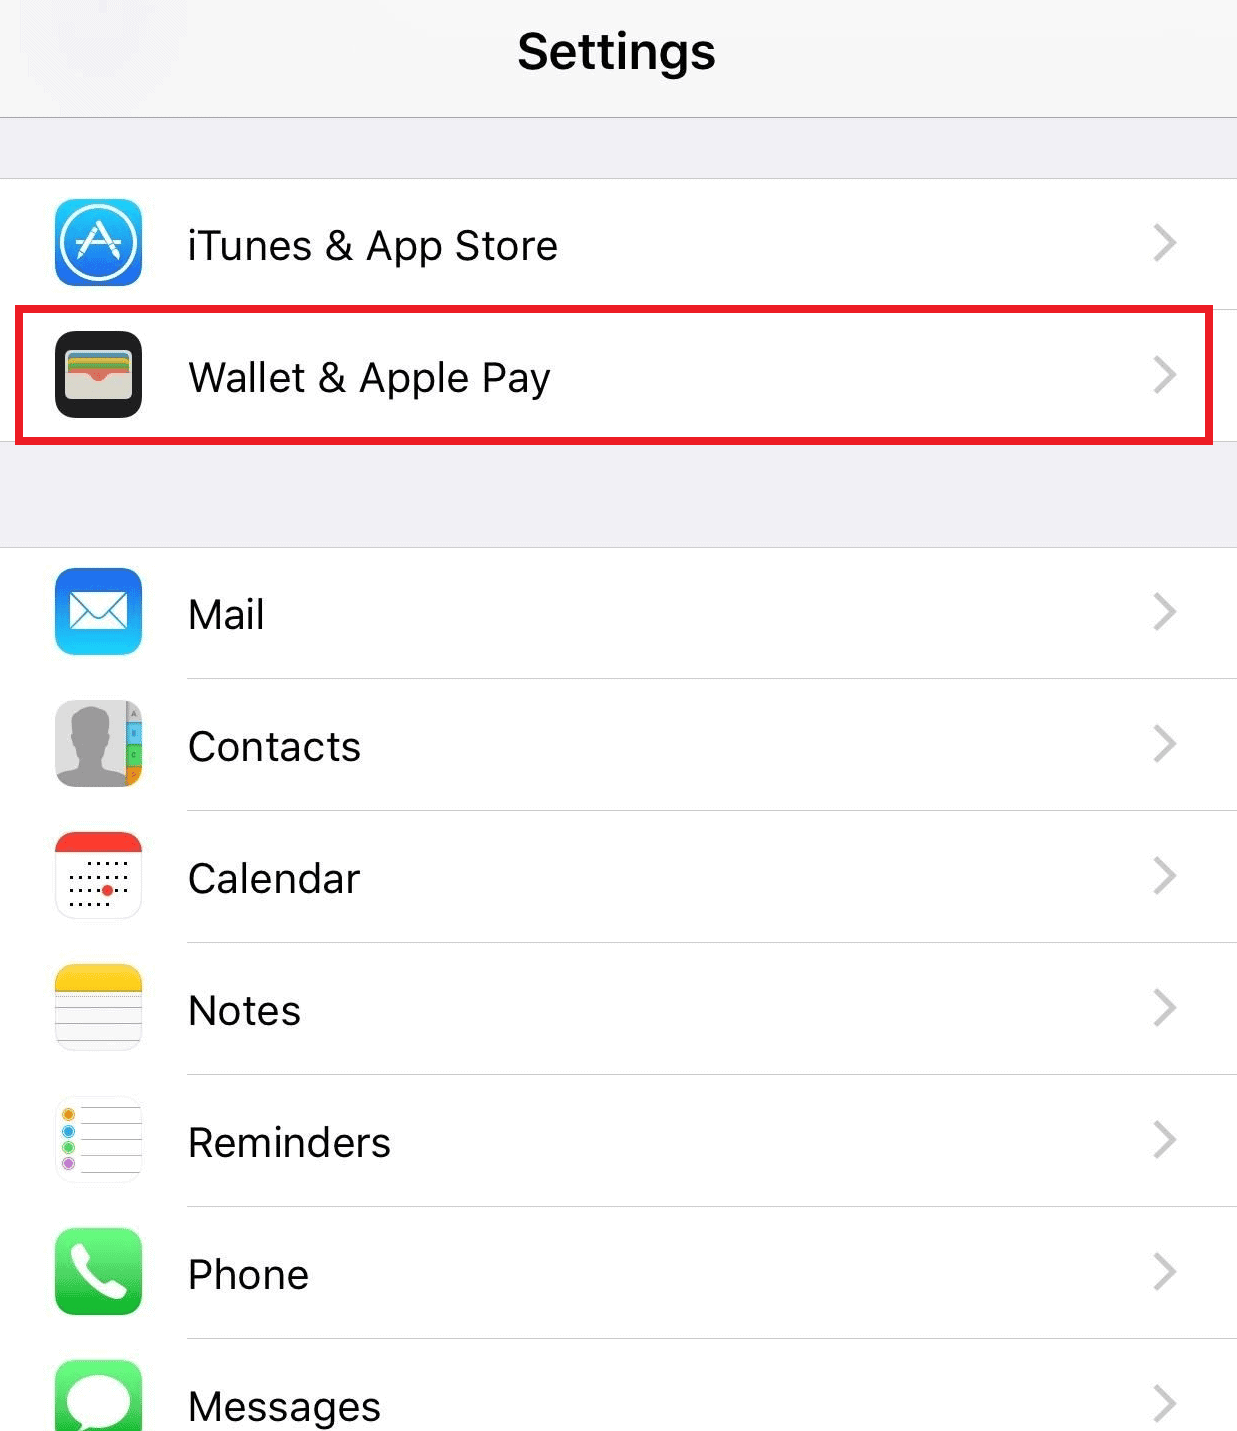 Tap on Wallet & Apple Pay from the list | How to Remove Credit Card from Apple ID